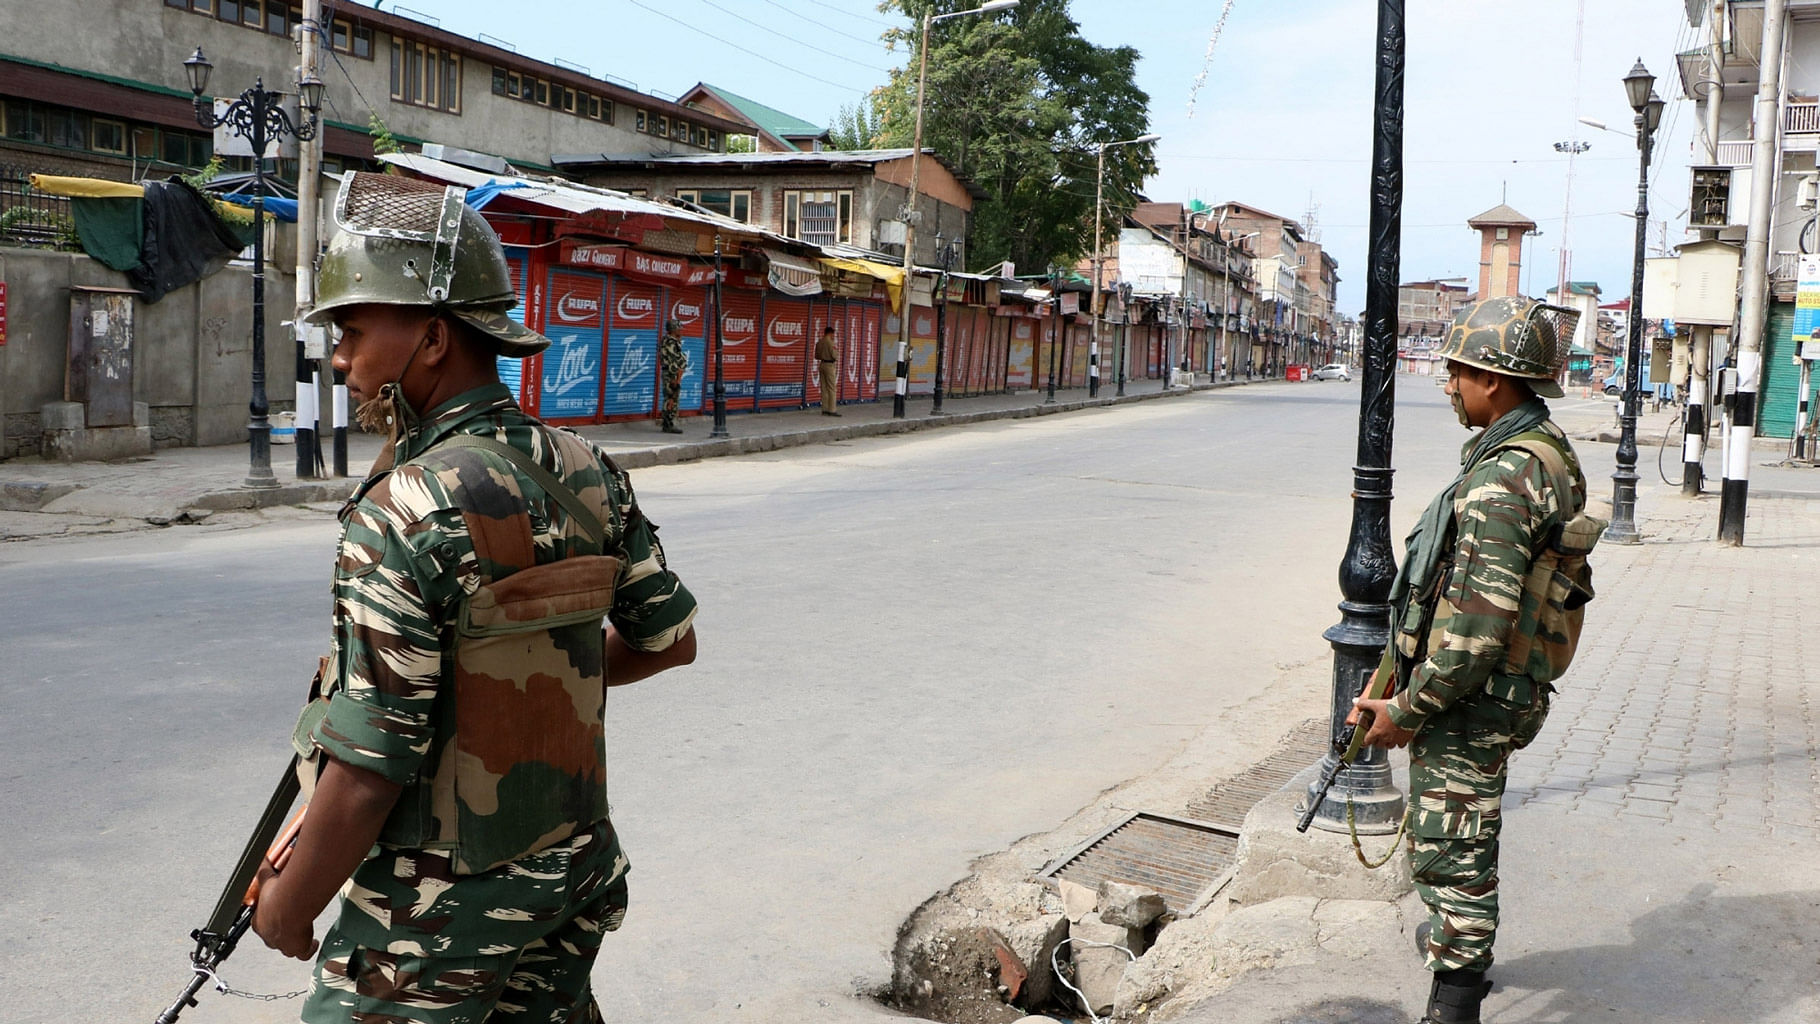 

Soldiers  on a Srinagar street when  curfew remained  imposed on the city till a few days ago.  (Photo: IANS)